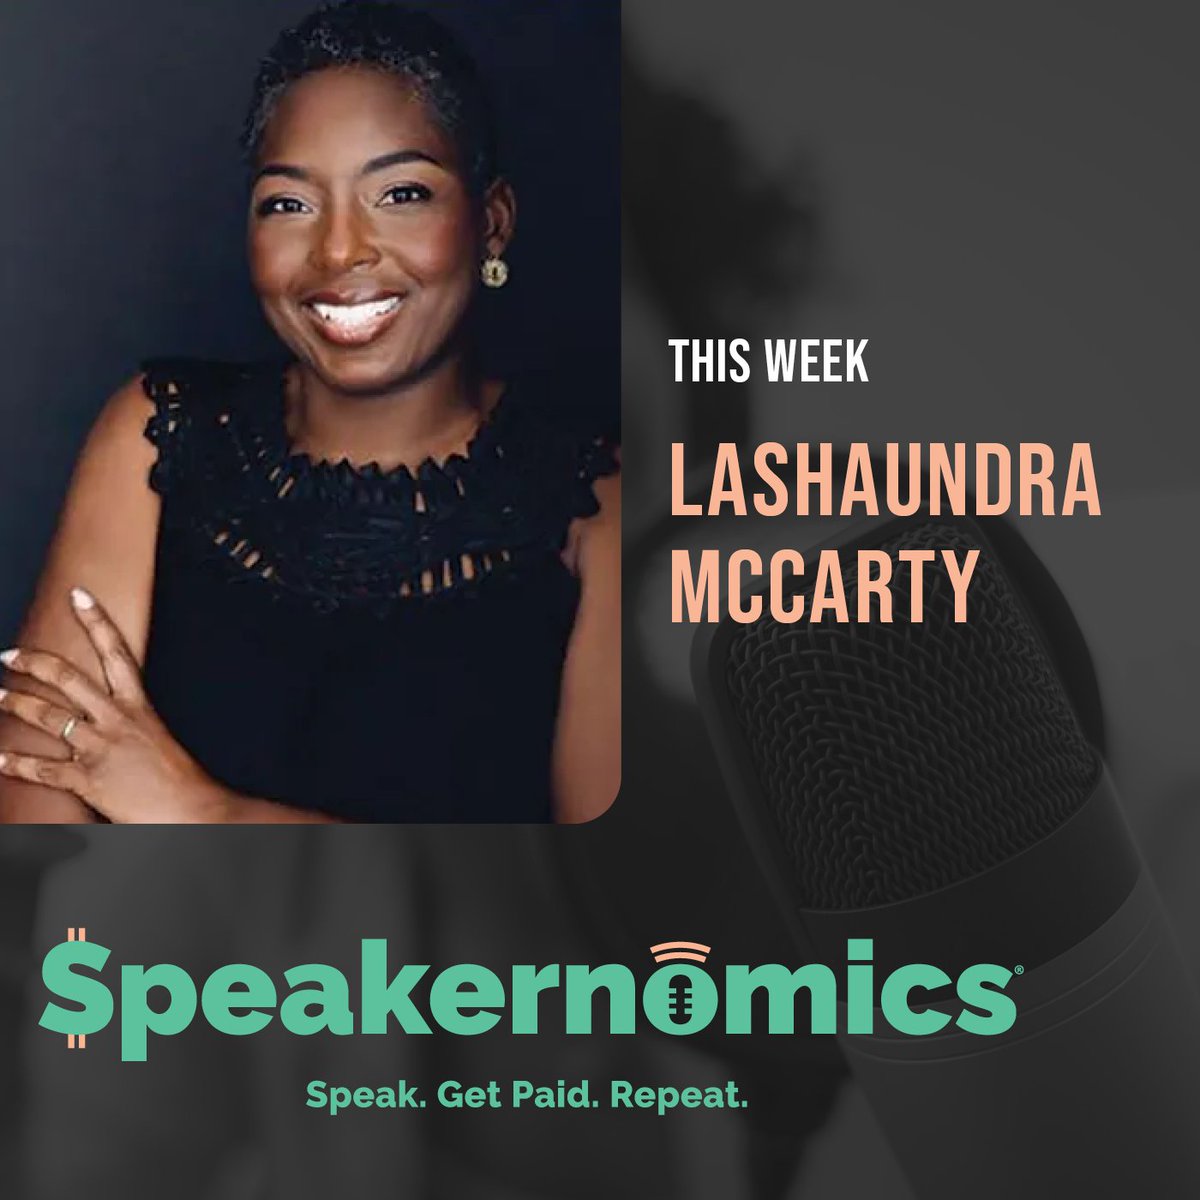 On this week’s episode of Speakernomics, we invited social media pro LaShaundra McCarty to share her best advice on making the most of social media platforms as a busy speaker and how it can actually help you get found and get booked. spkr.bz/3h2fXHh